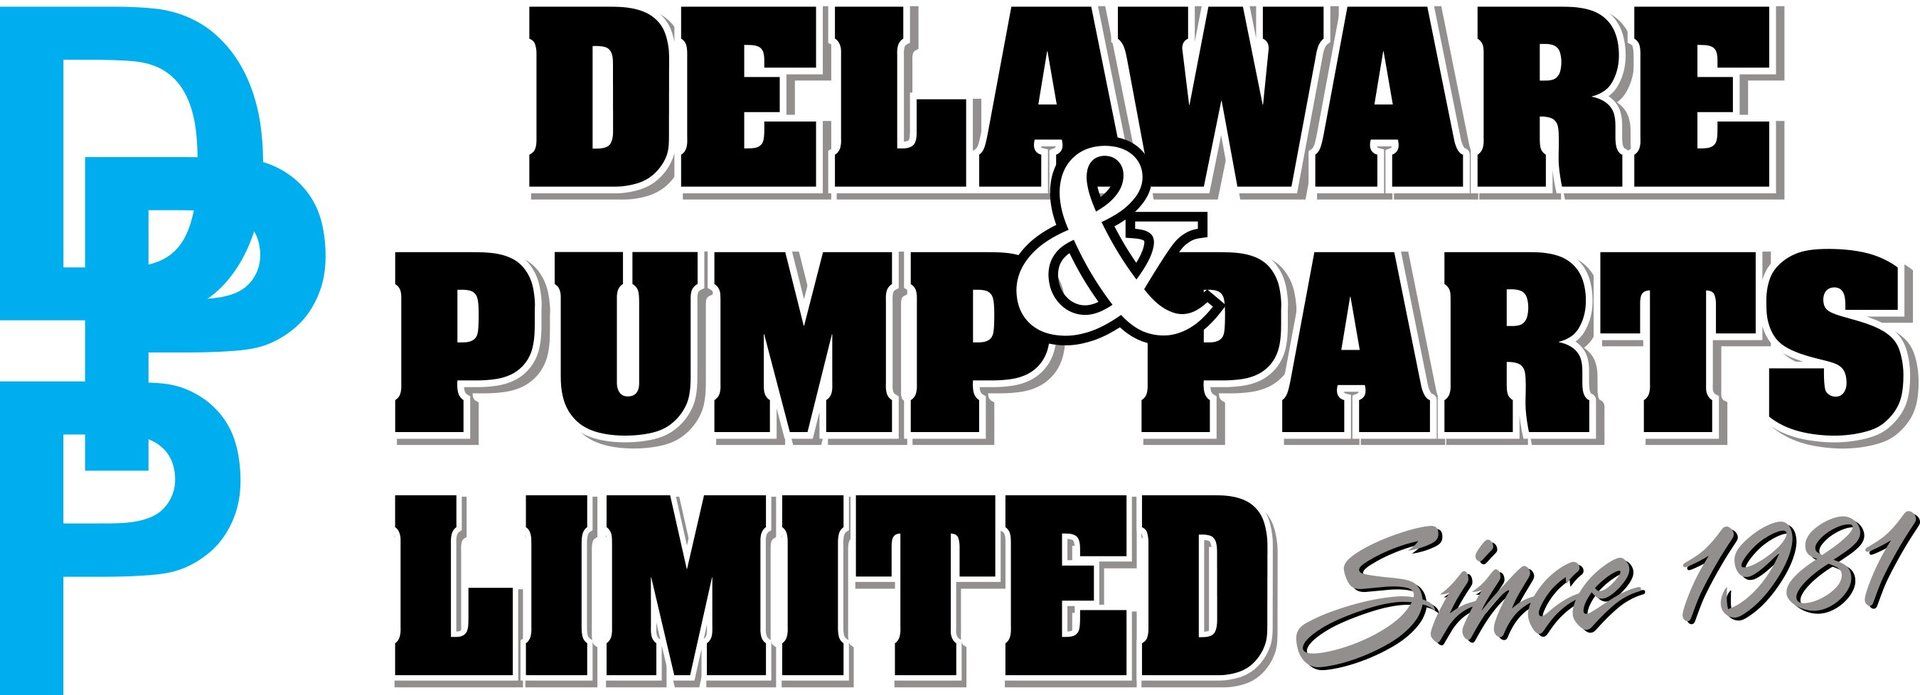 The logo for delaware pump & parts limited since 1967